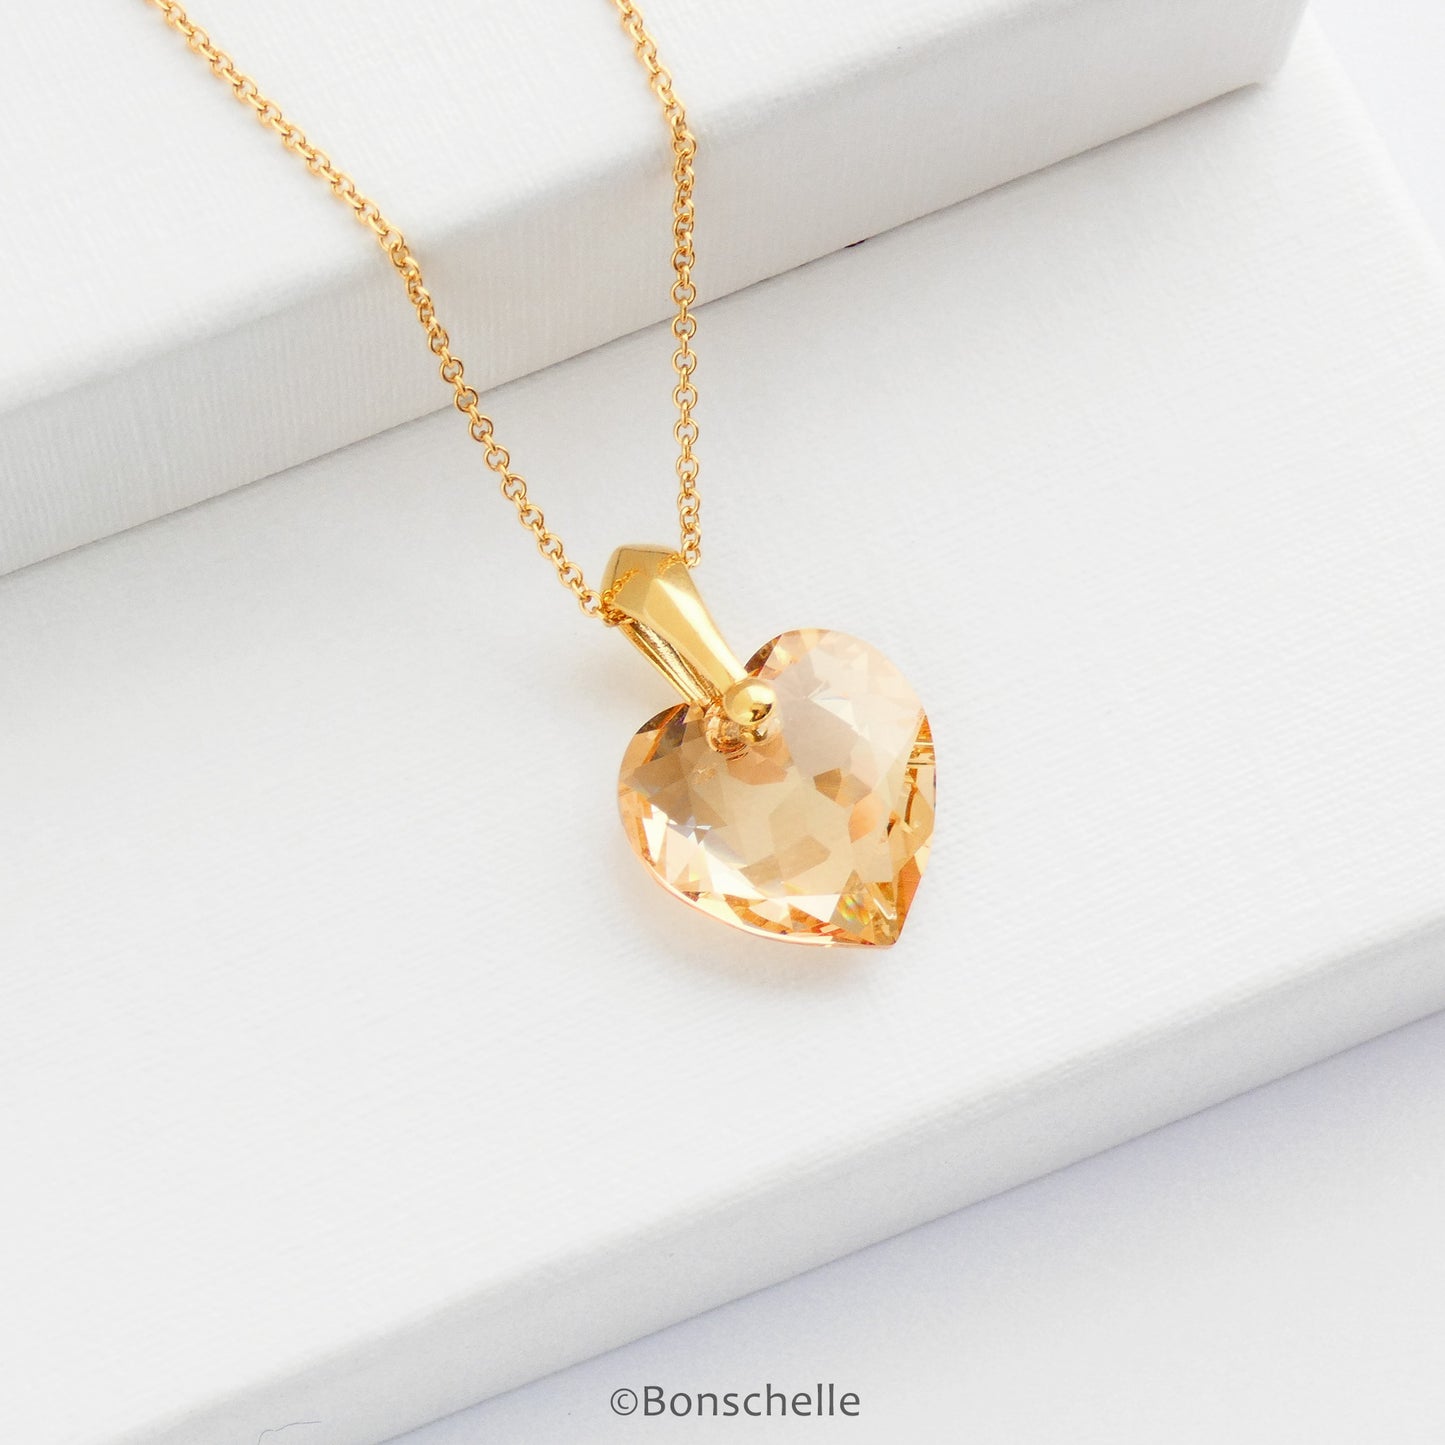 Golden_Crystal_Anniversary_Heart_necklace_2.jpg  2000 × 2000px  handmade necklace with pale gold colour crystal cut Swarovski heart pendant and 14K gold filled chain 